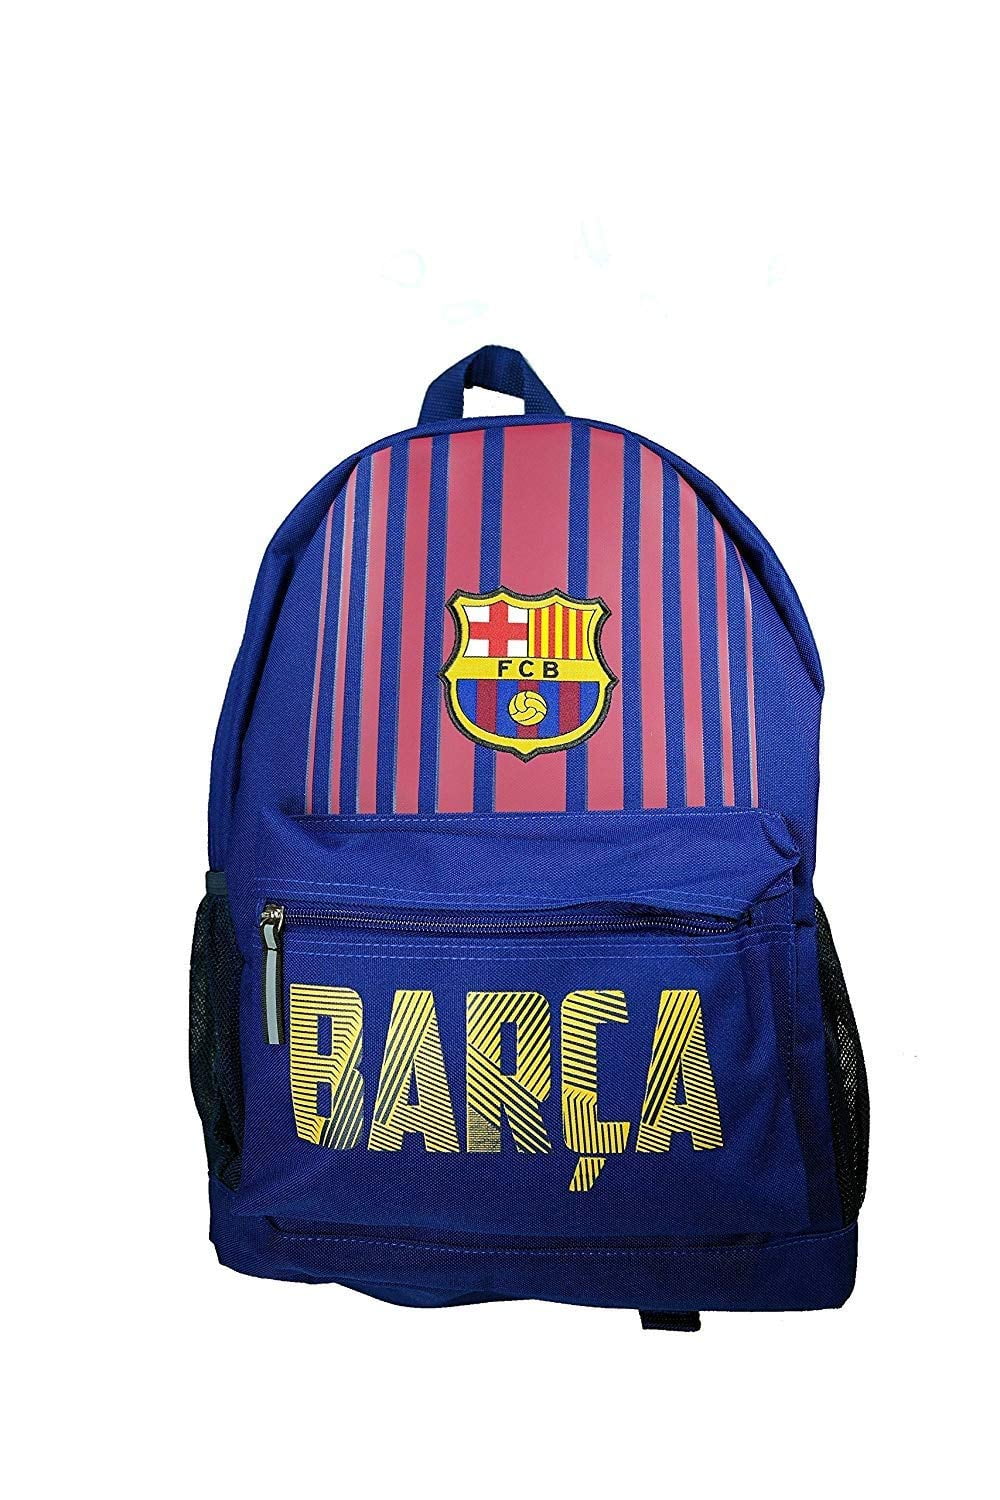 MESSI Lunch Bag BARCA School Insulated Boys Football Personalised NL07 